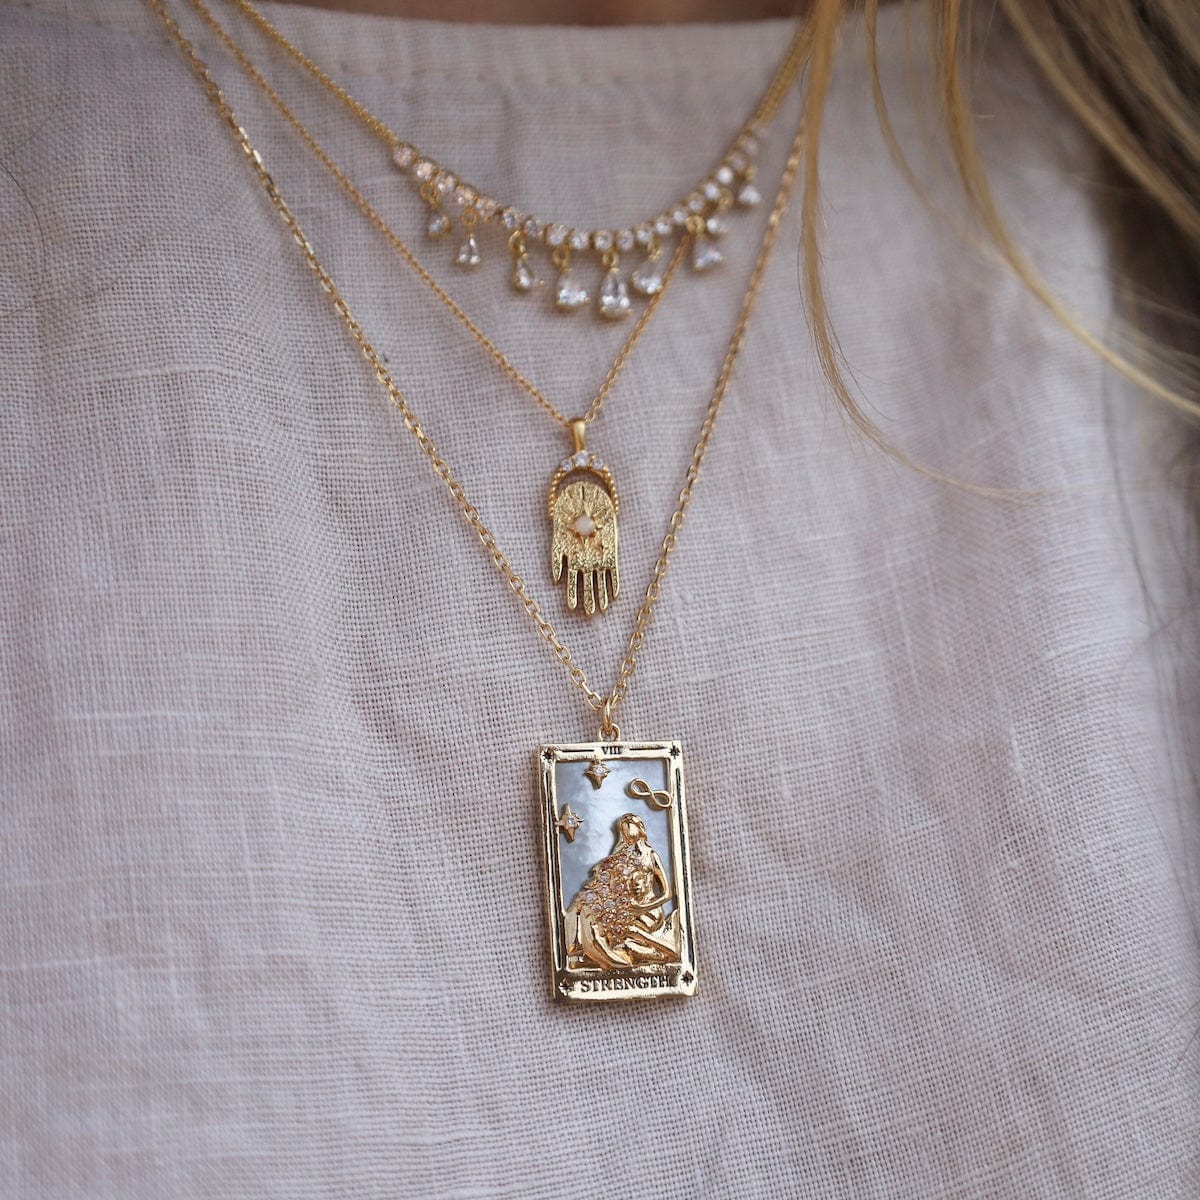 NKL-GPL The Sregnth Tarot Card Necklace